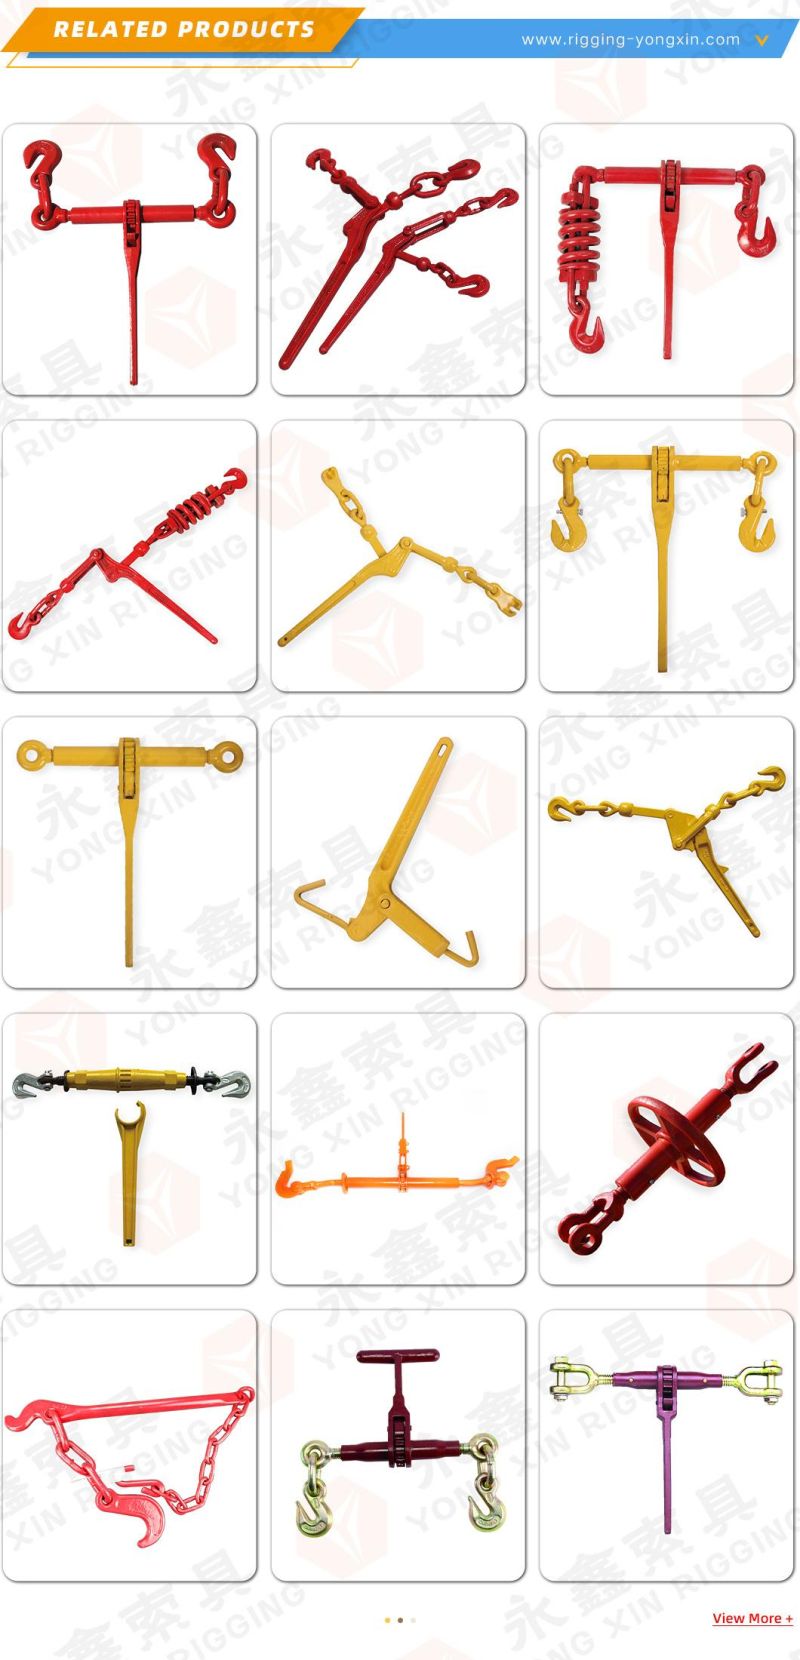 Lever Type Load Binders New Arrival Wholesale Forged Lever Type Chain Load Binders